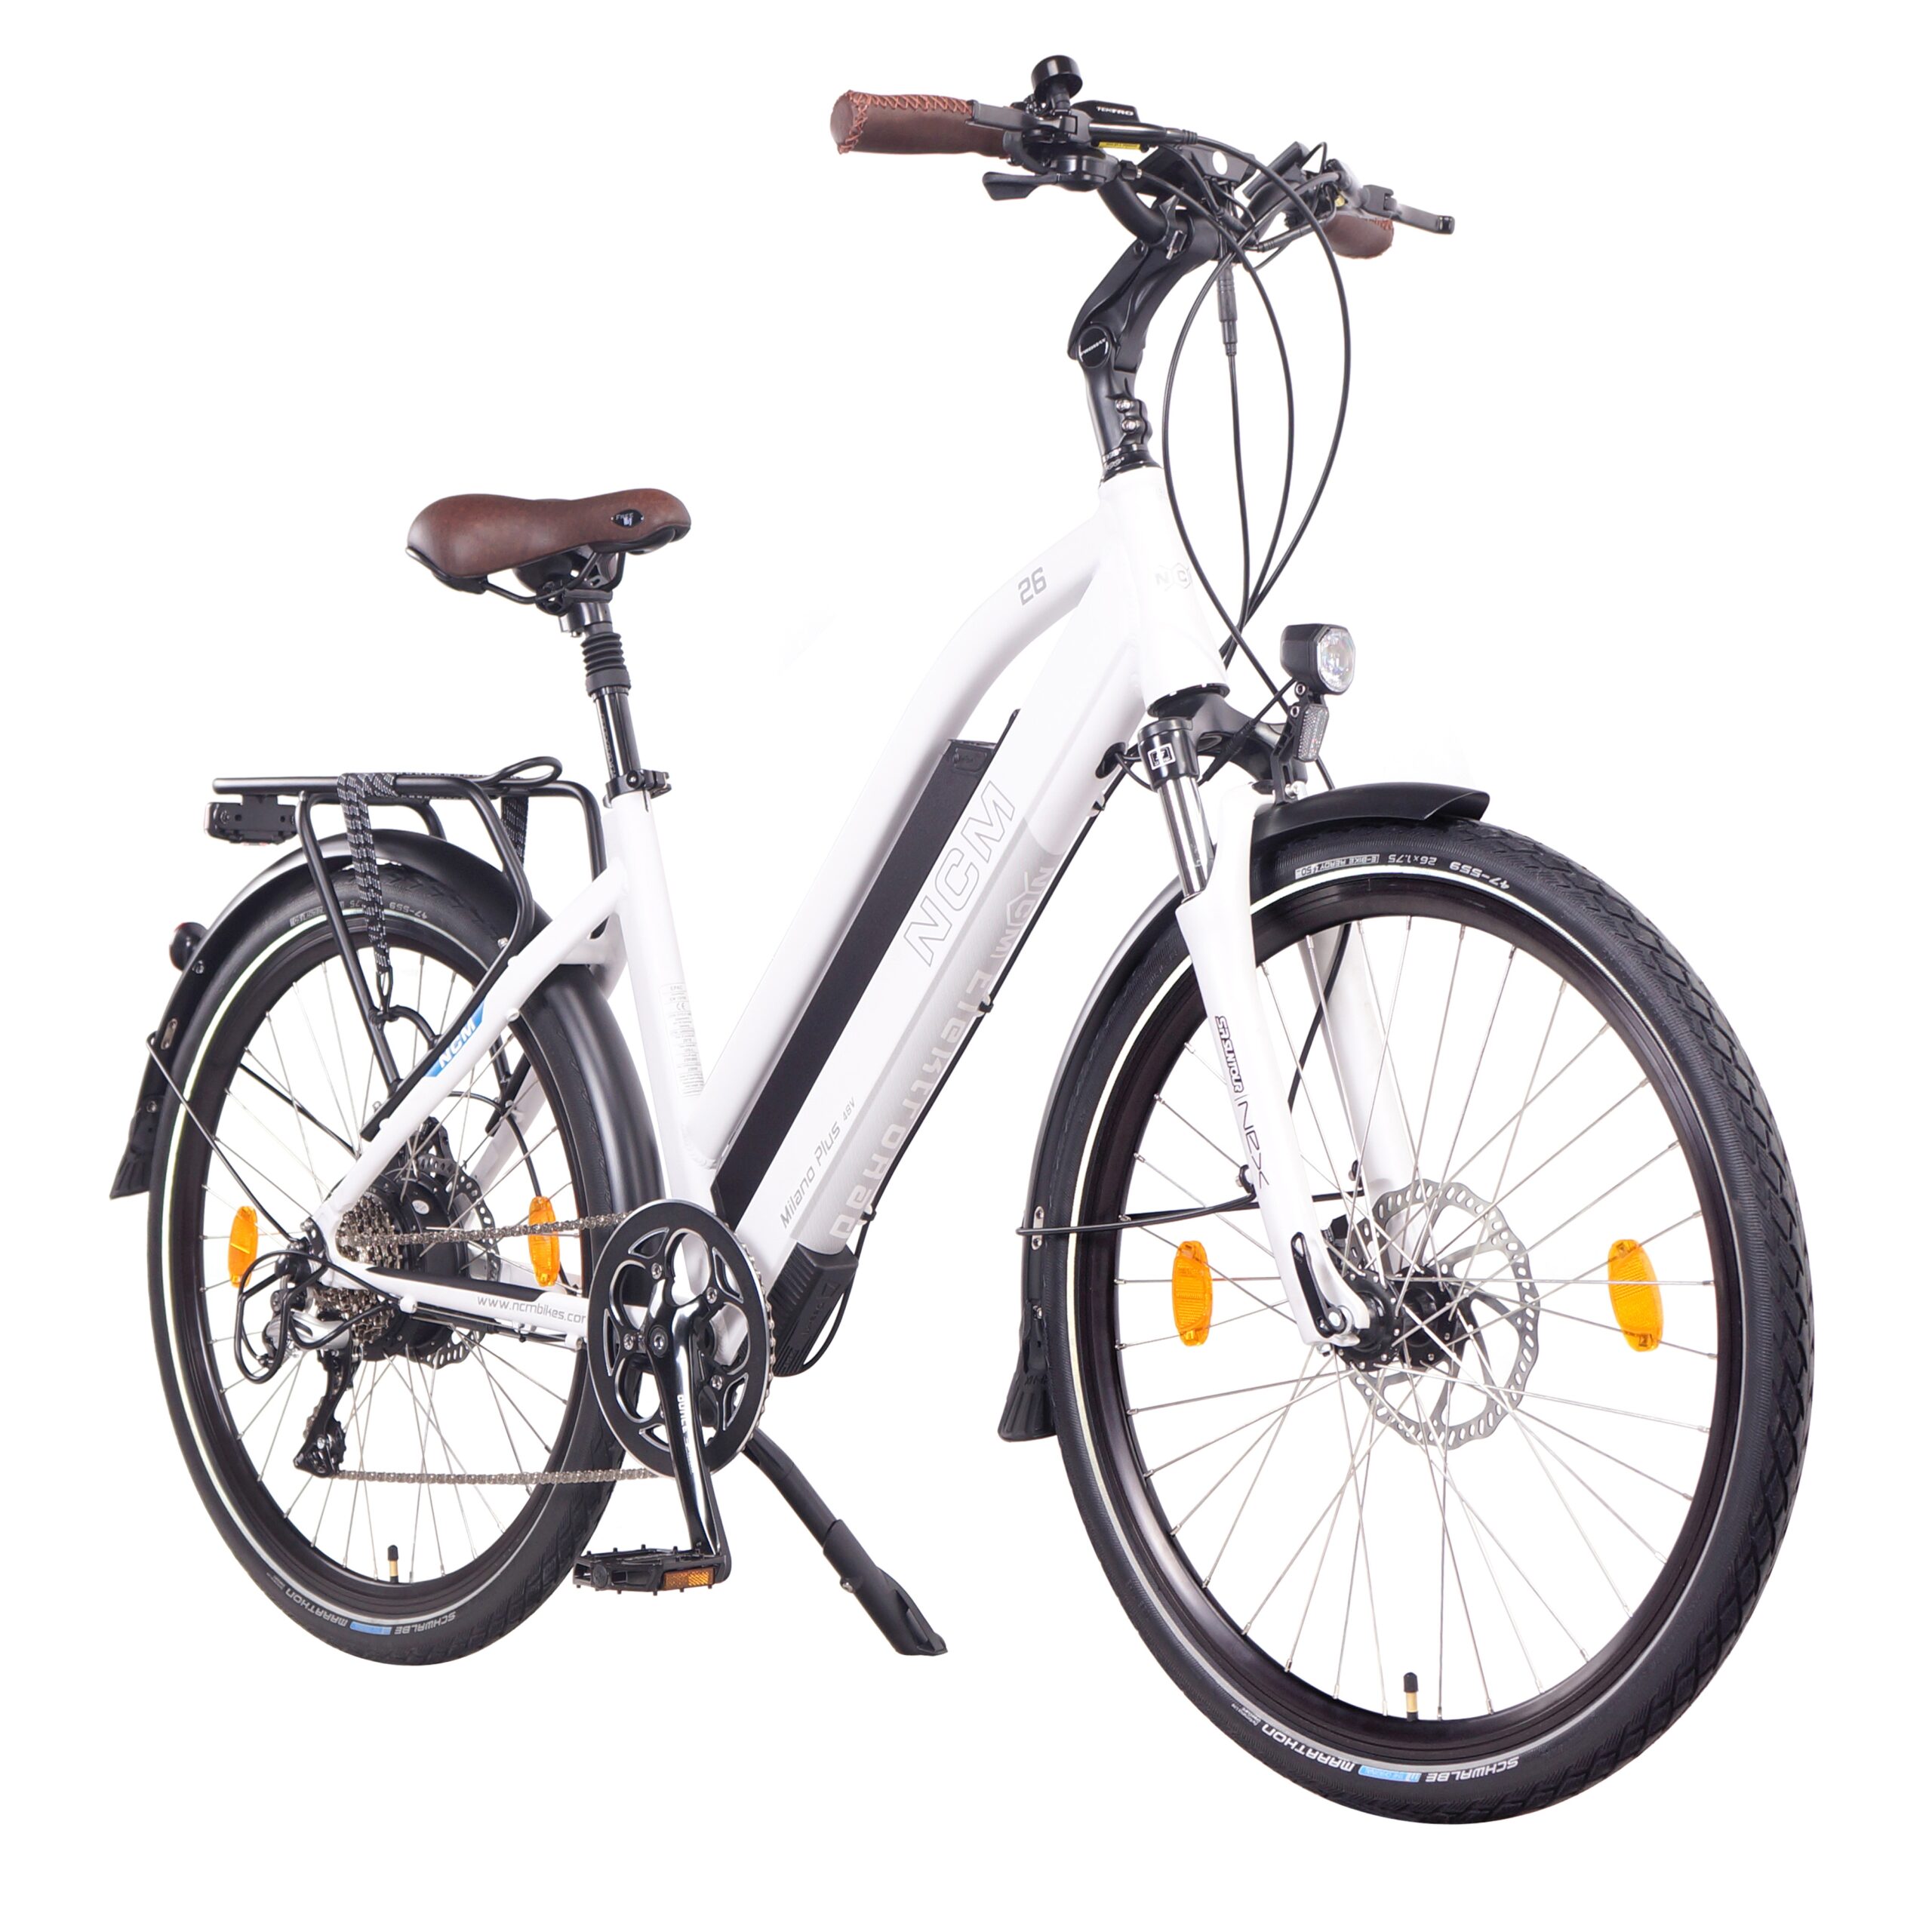 BMW offers complimentary e-bike for all PHEV or BEV purchases until June 30